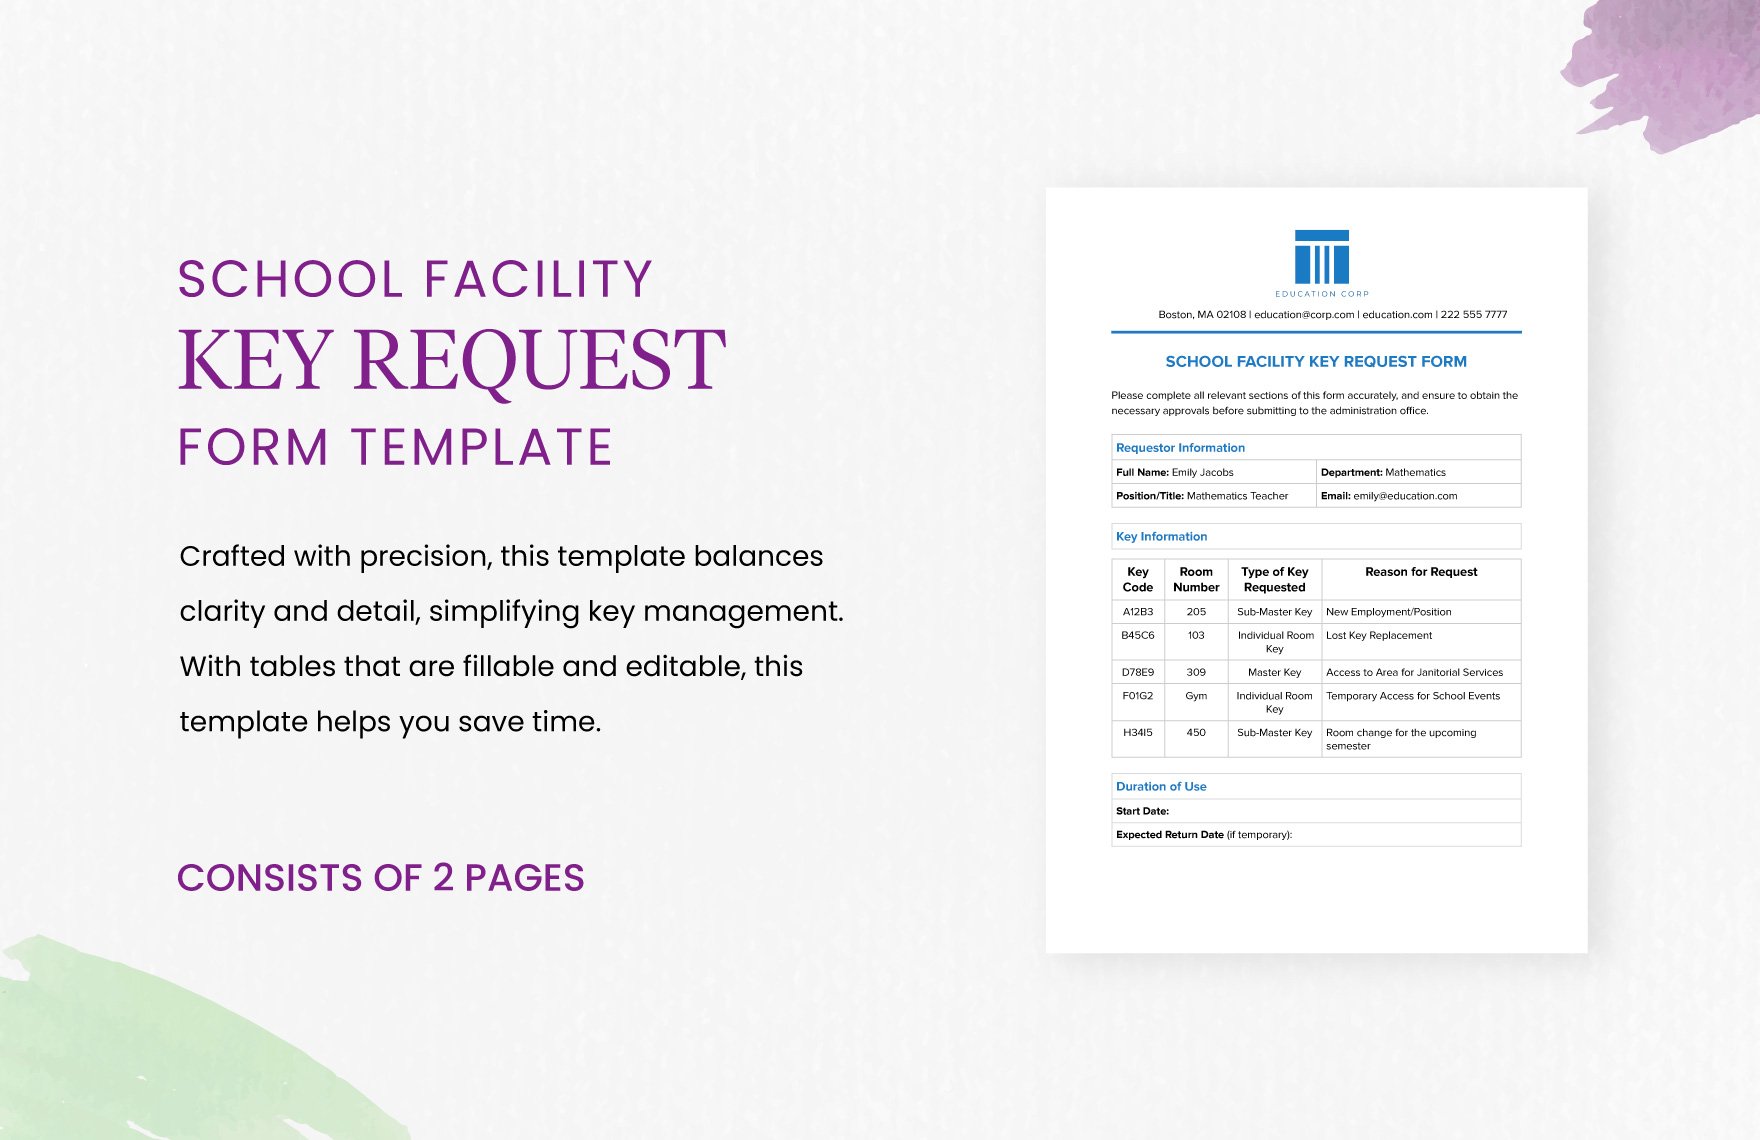 School Facility Key Request Form Template